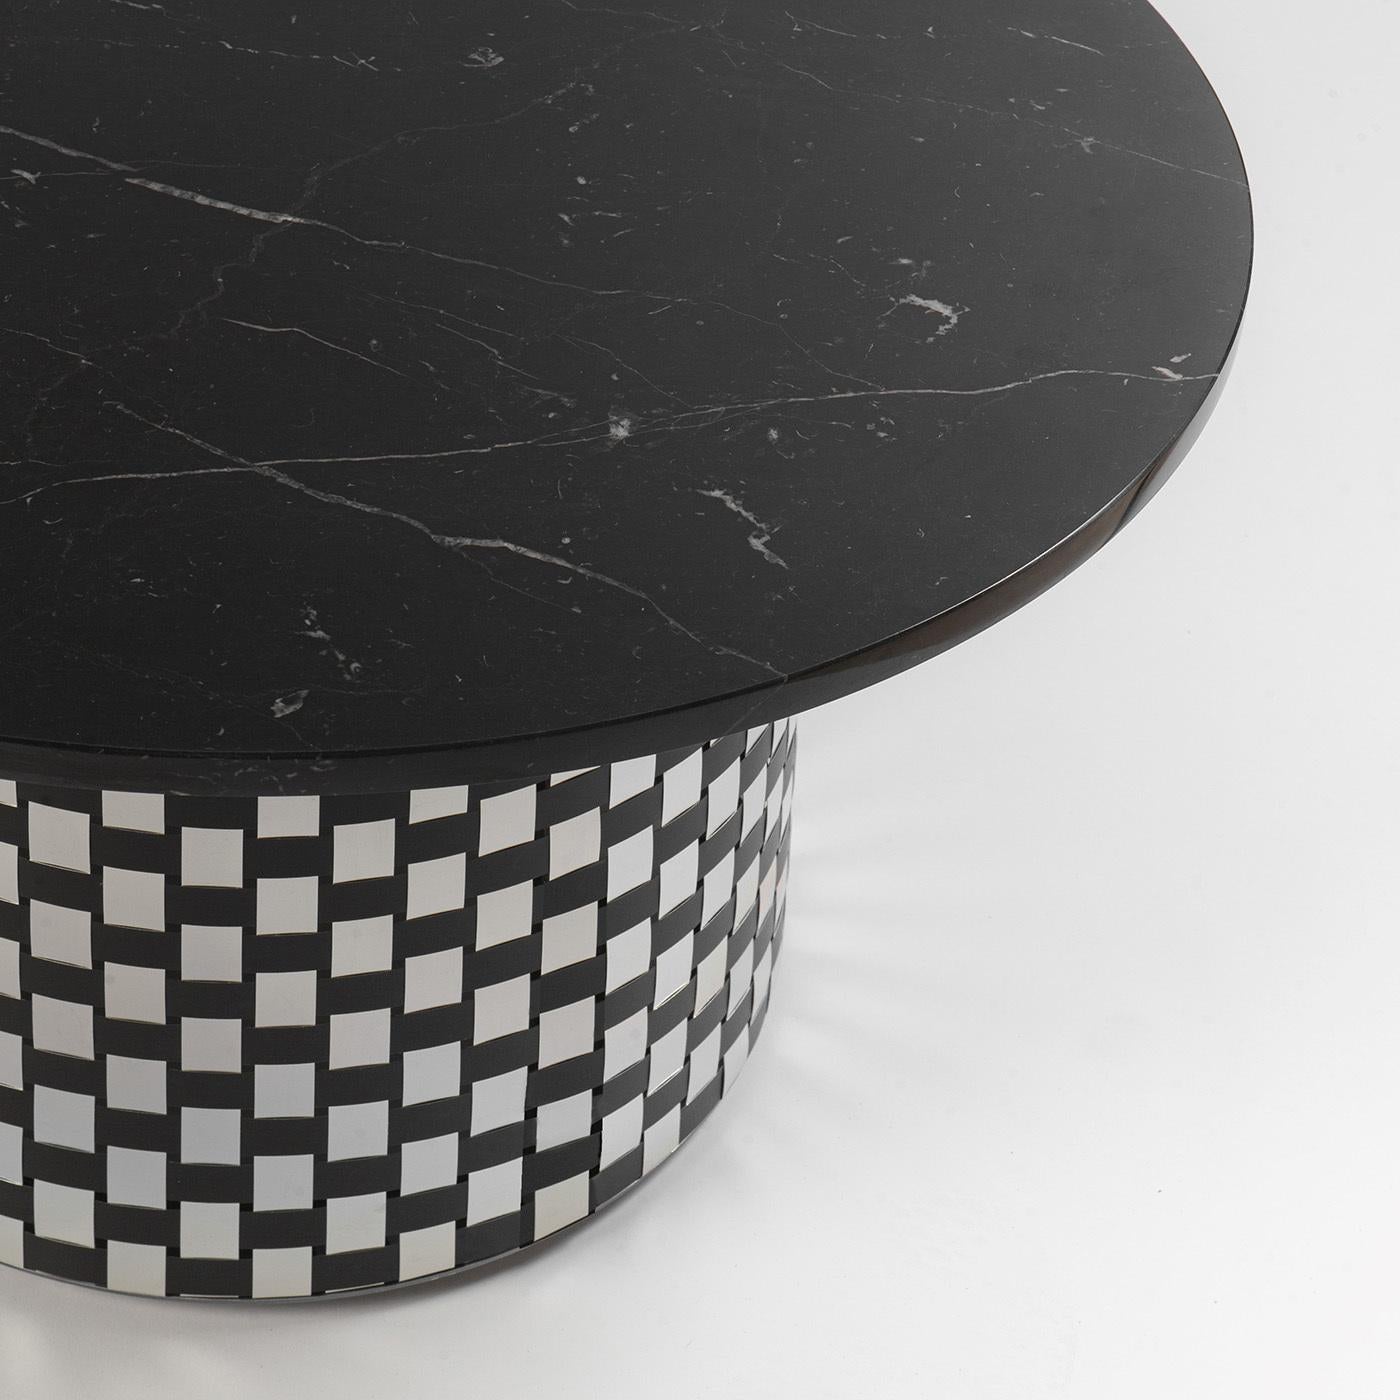 Named after Hecate, the Greek goddess of magic and the night, this coffee table is marked by a striking combination of elegant and dark hues, contrasting textures, and refined materials. Inspired by the Optical Art movement of the 1960s, it rests on